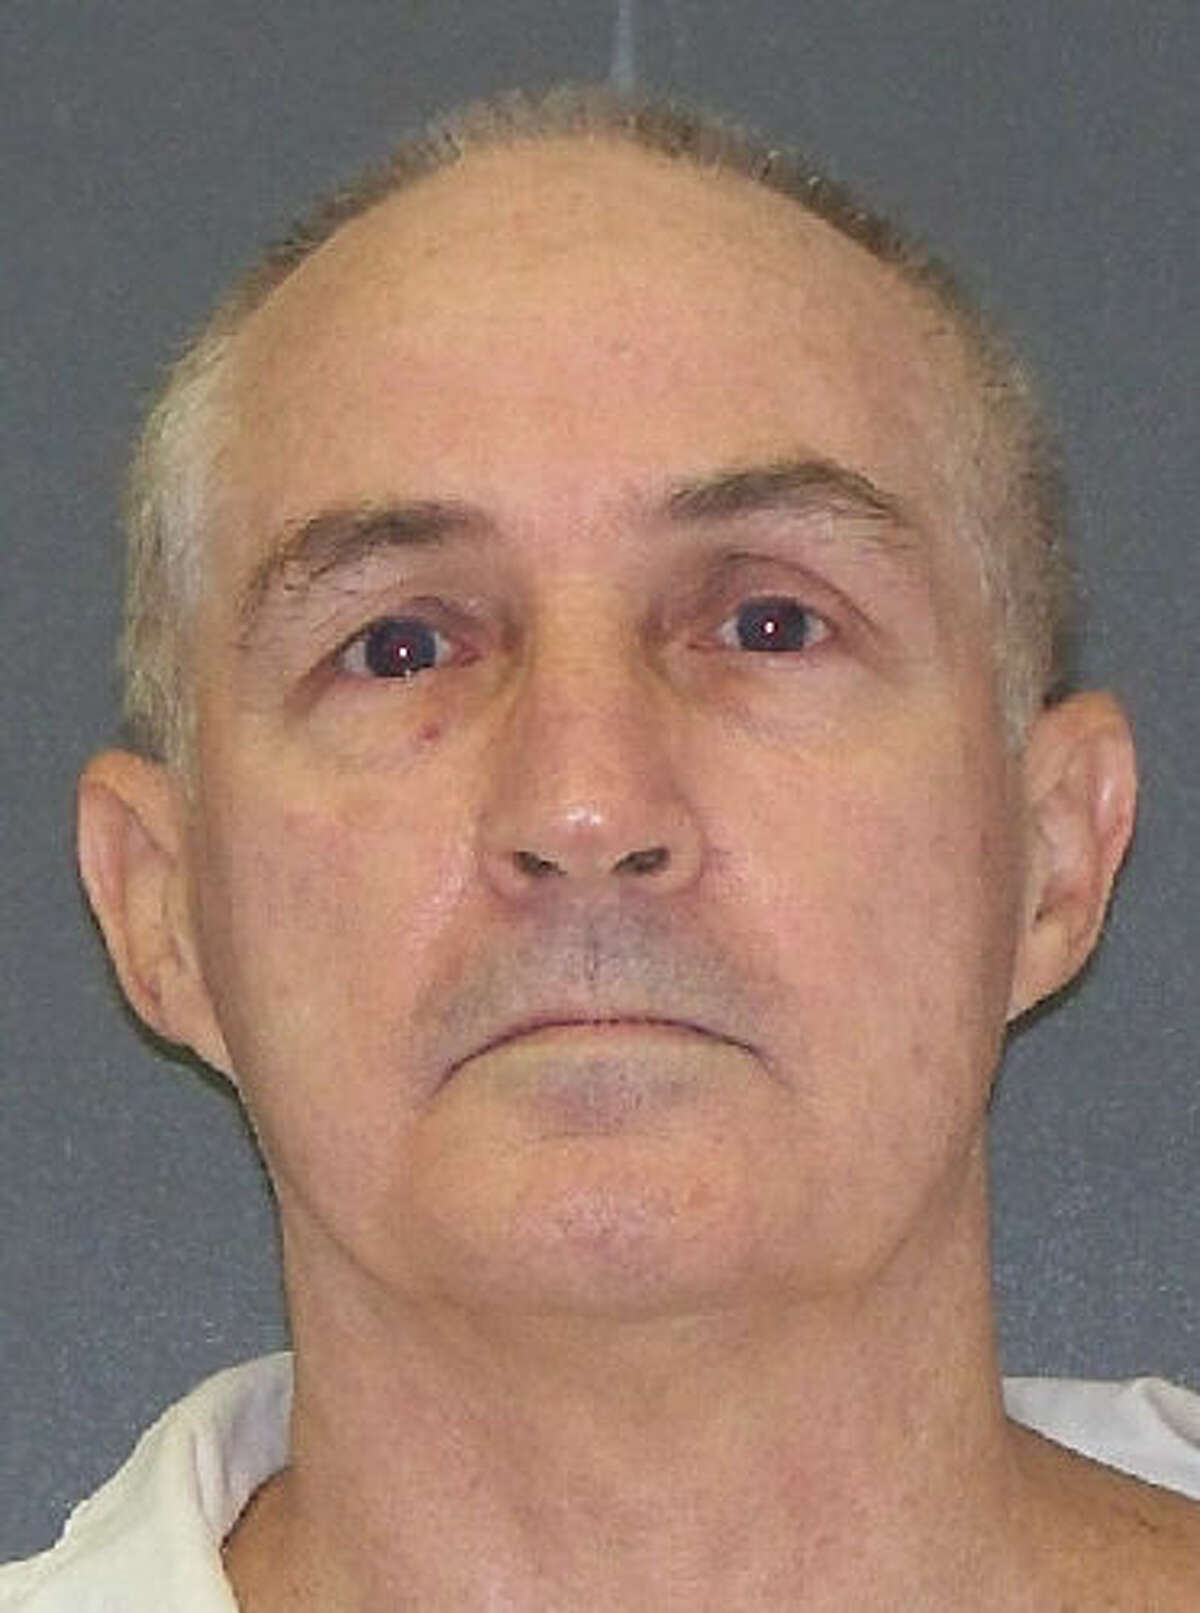 30 years after double slaying, sex offender pleads guilty